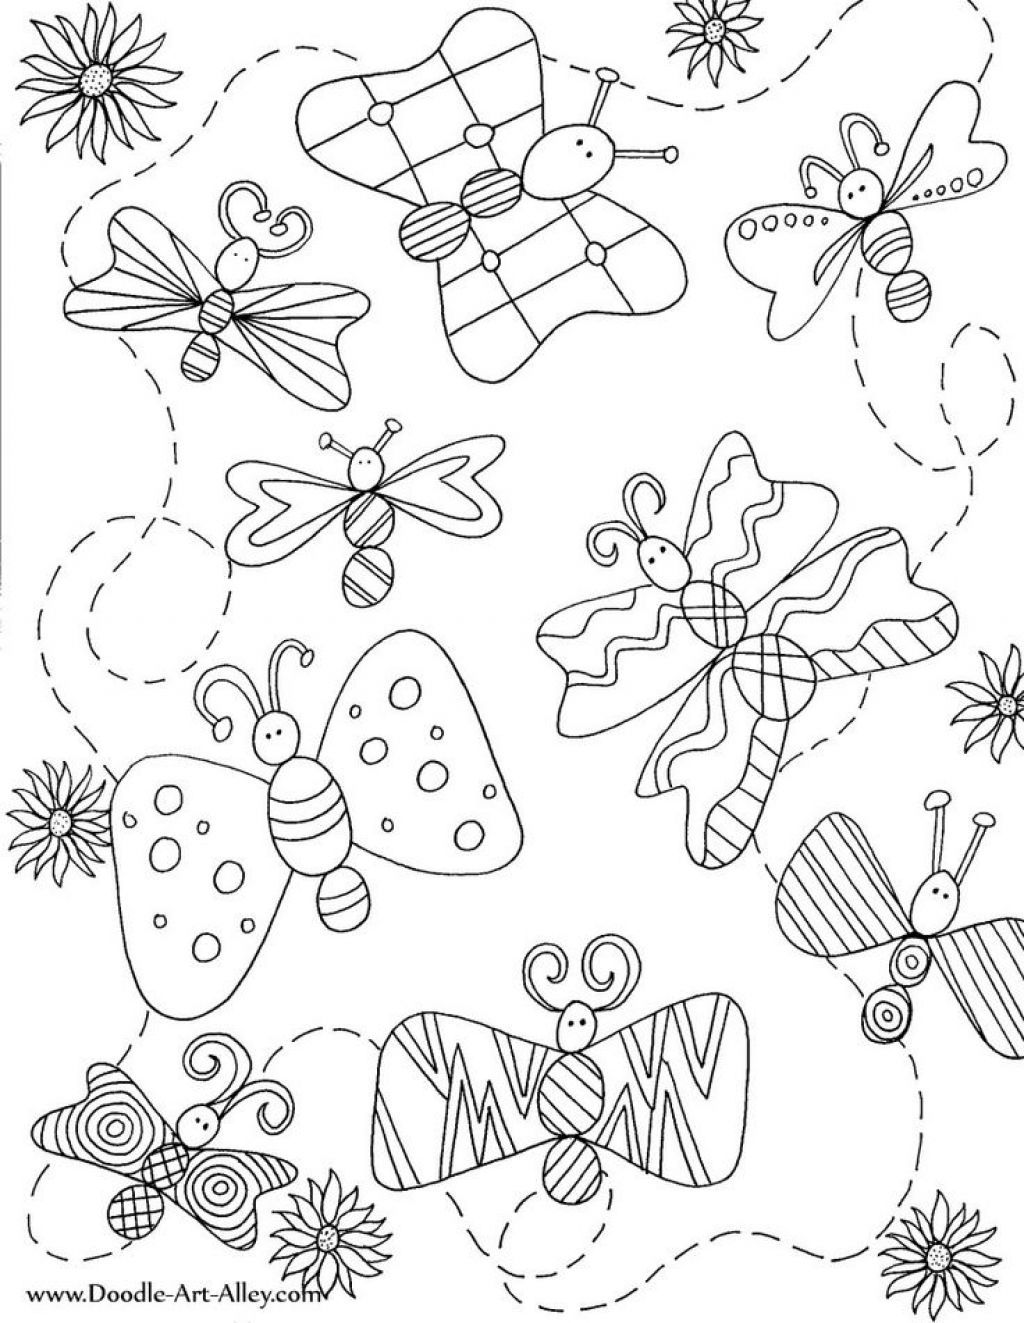 Doodle Art Alley Coloring Pages Butterflies – Auto Coloring